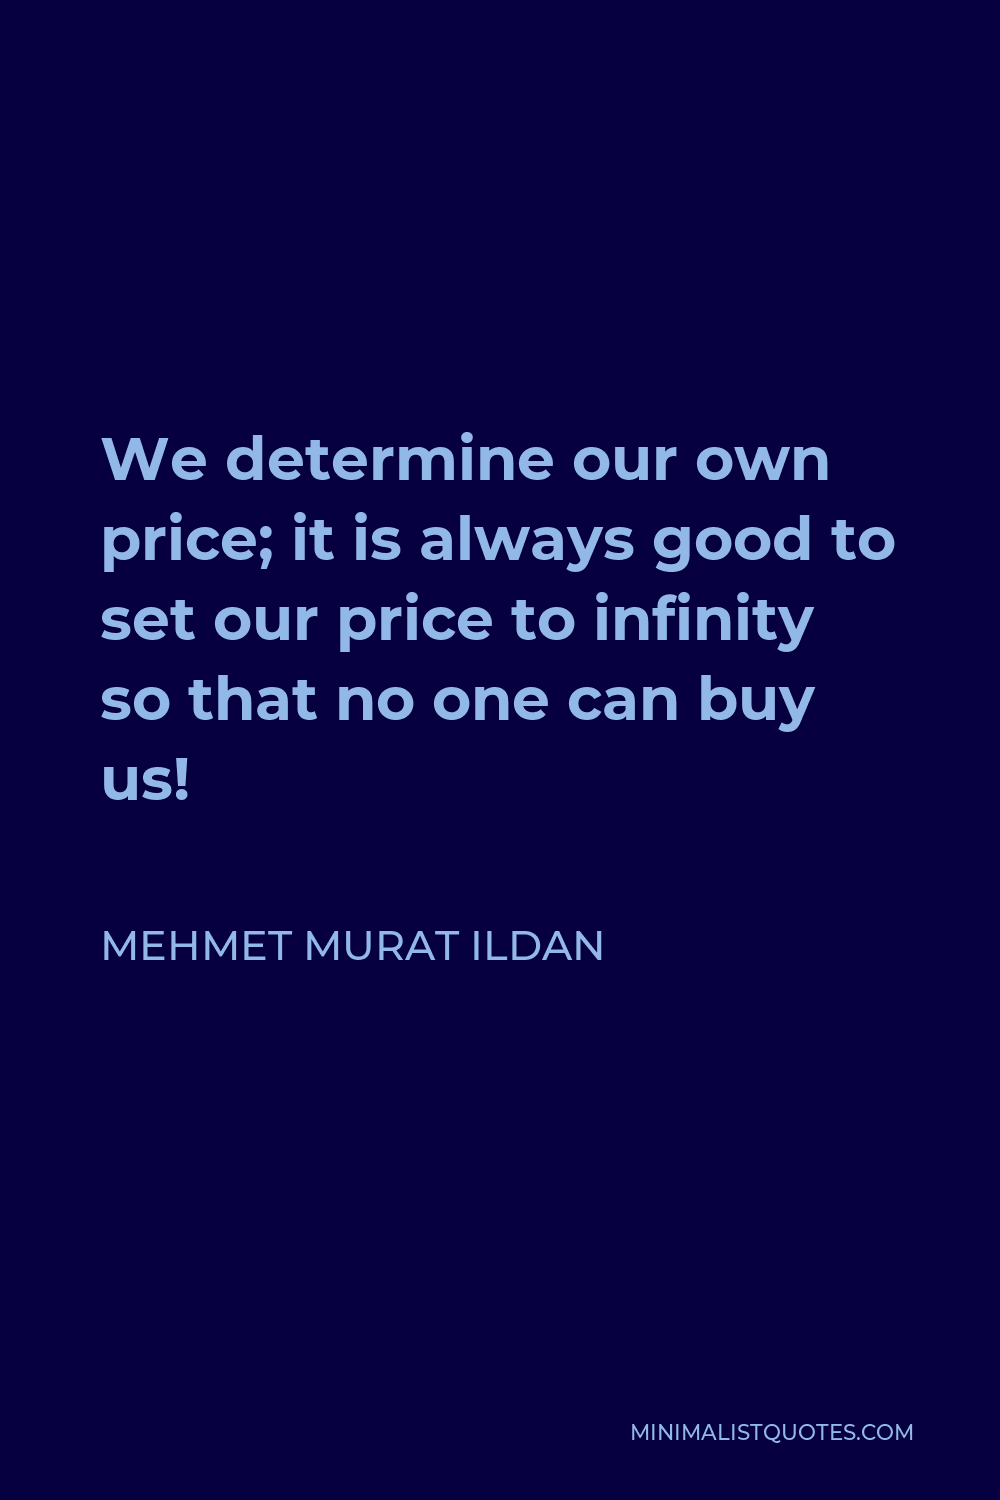 Mehmet Murat Ildan Quote - We determine our own price; it is always good to set our price to infinity so that no one can buy us!